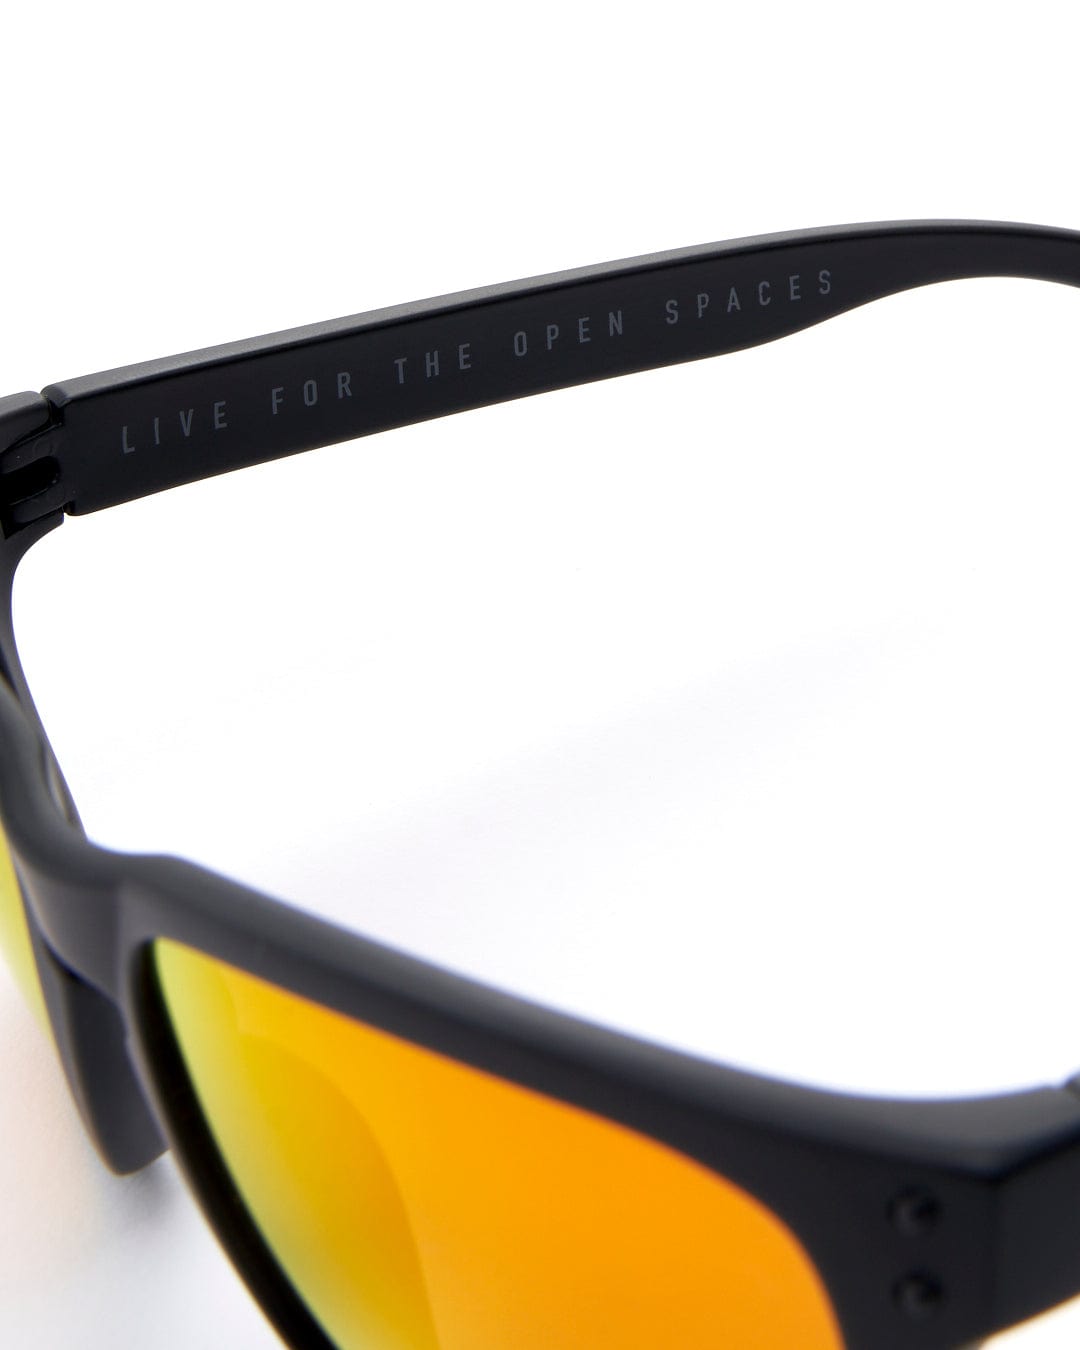 A pair of Saltrock Ranger - Recycled Polarised Sunglasses - Black with orange mirrored lenses.